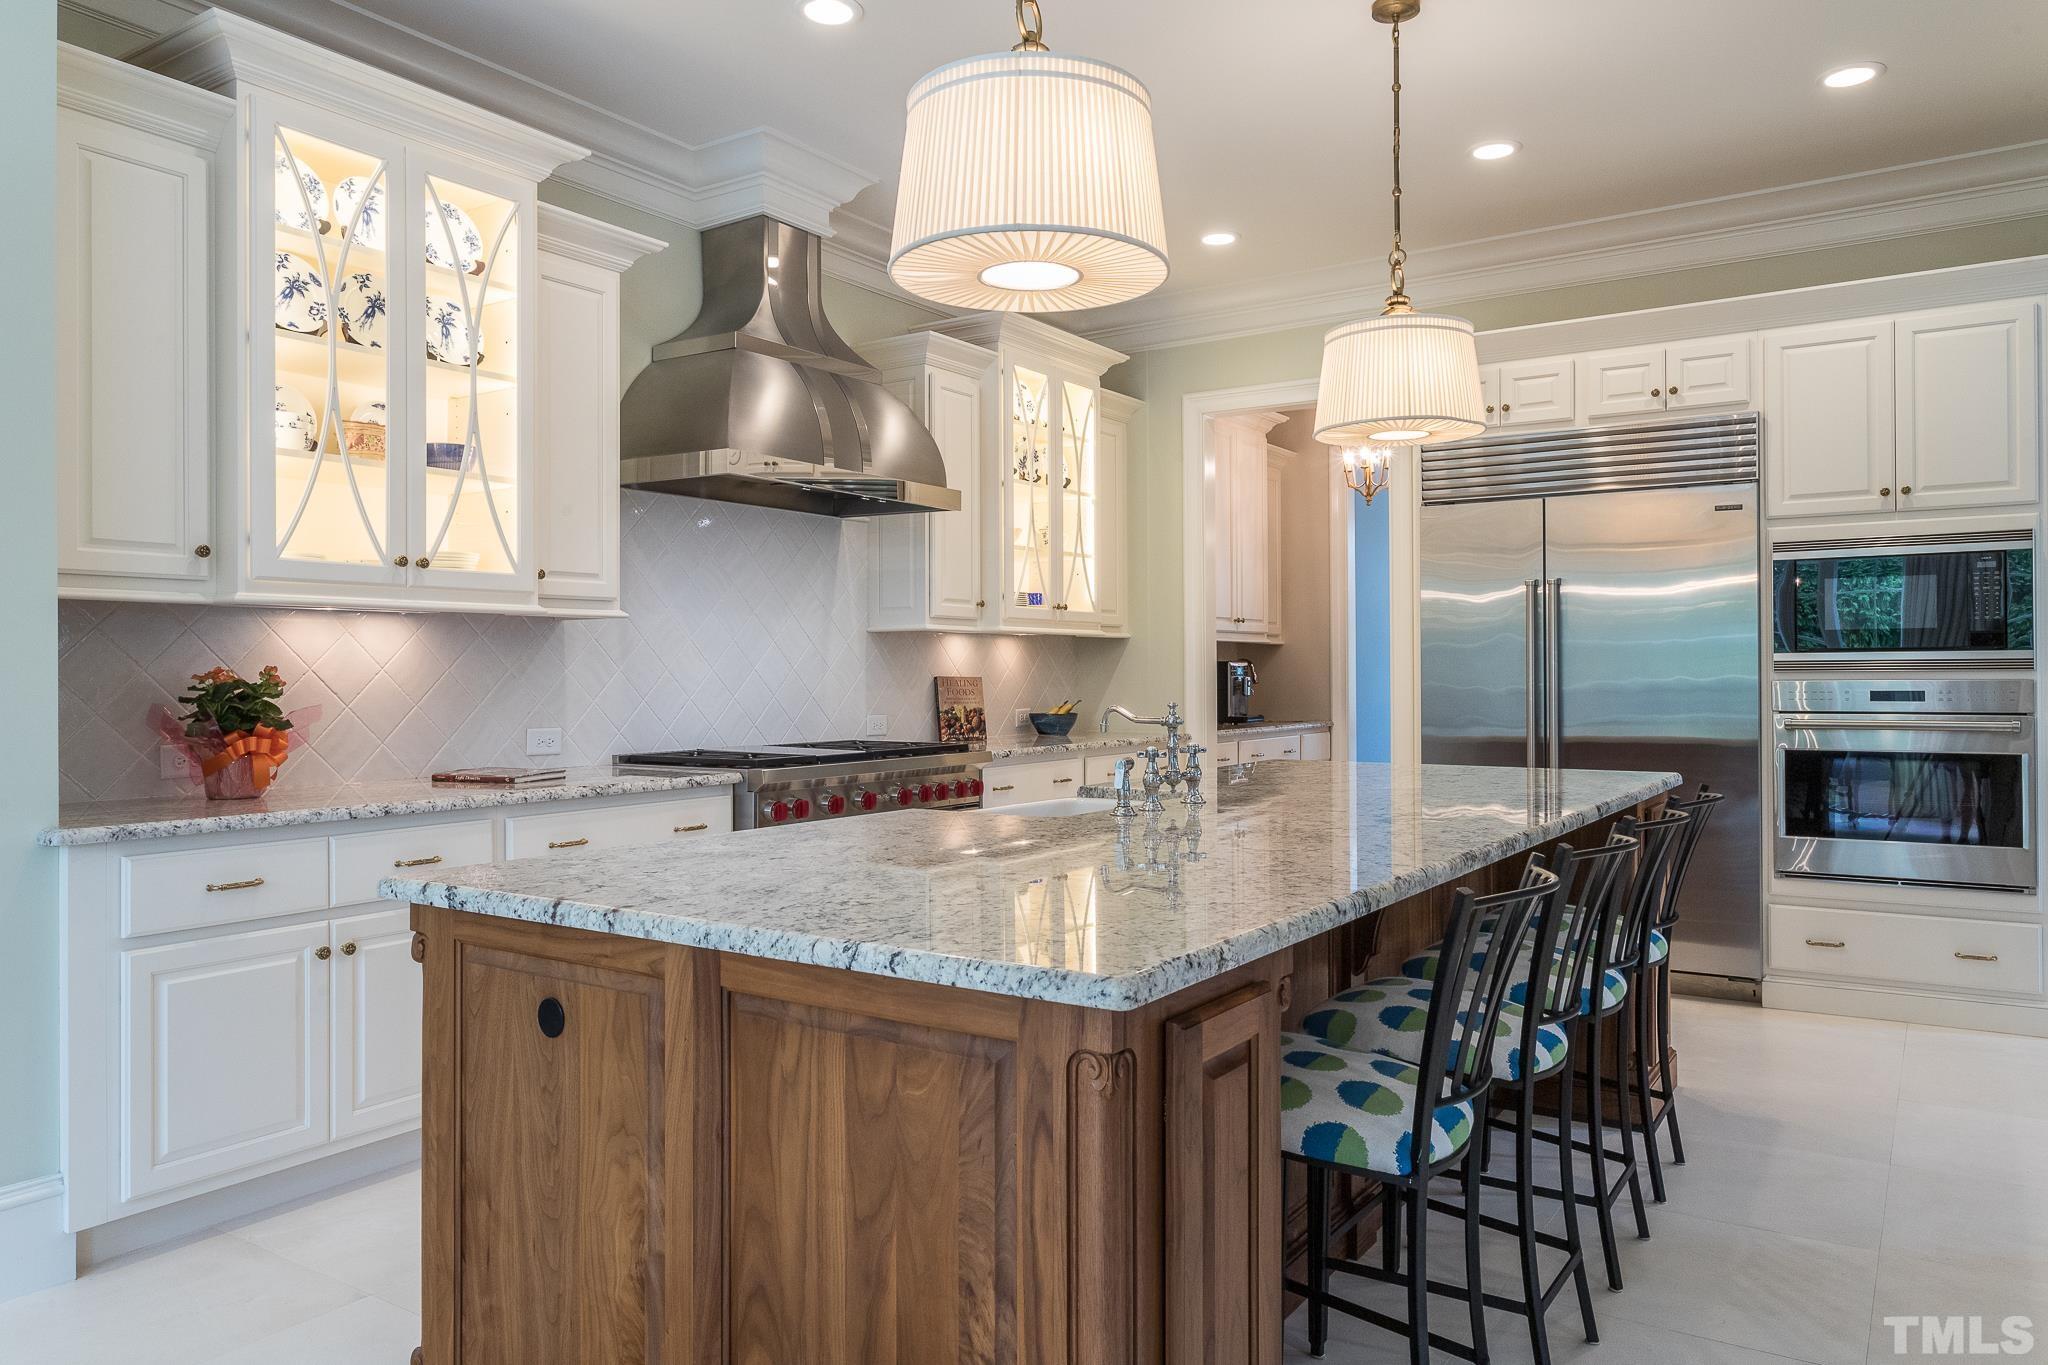 Enjoy a casual brunch or catch up with friends and family over hors d'oeuvres at your beautiful kitchen island